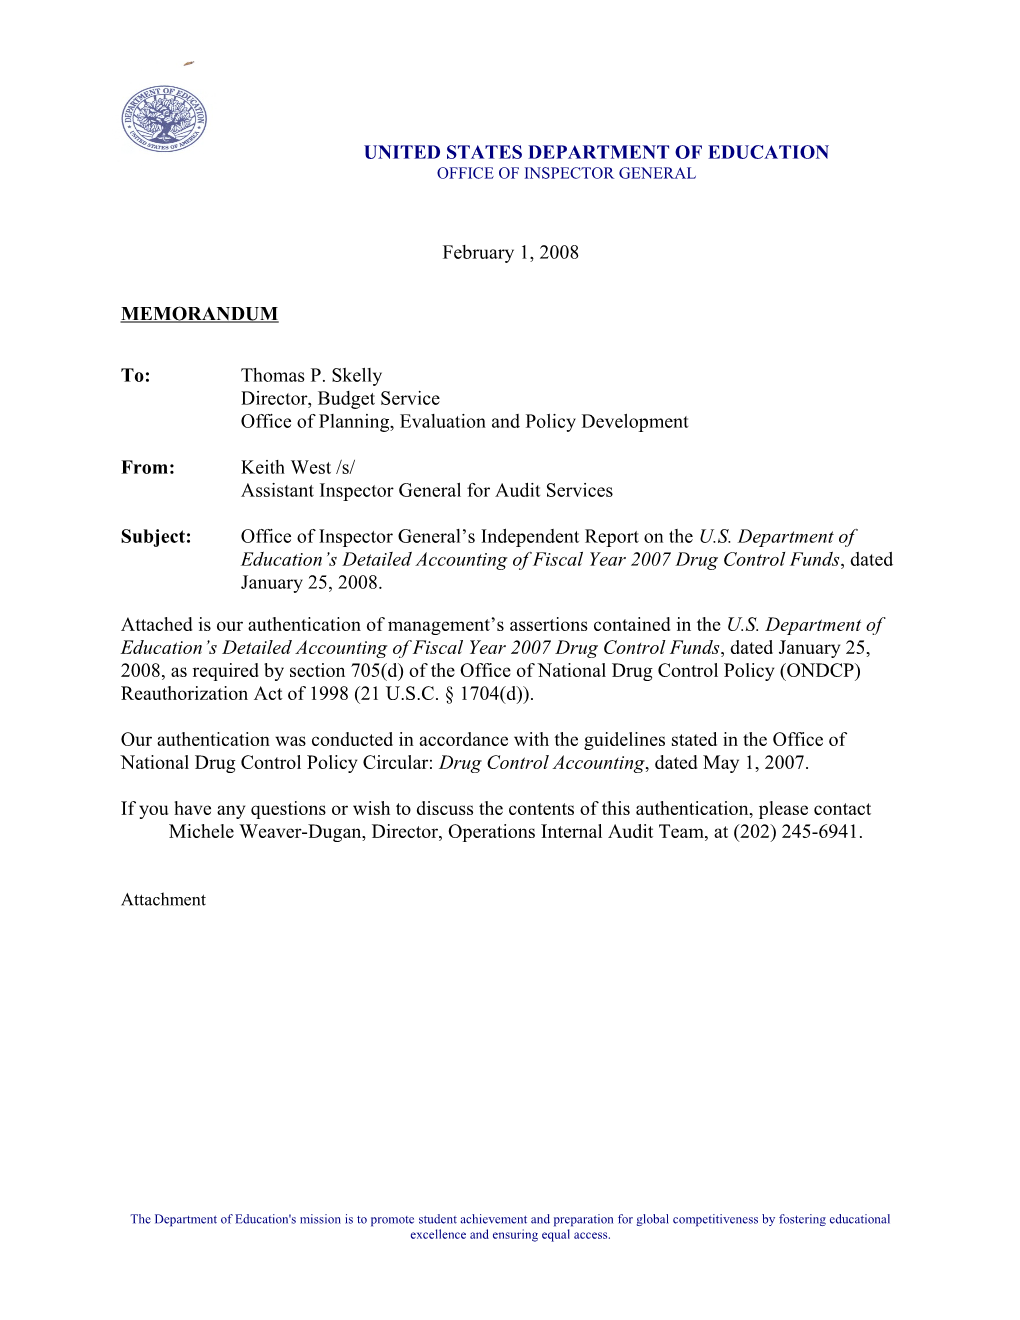 Audit B19I0001 - OIG S Independent Report on the Department S Detailed Accounting of Fiscal